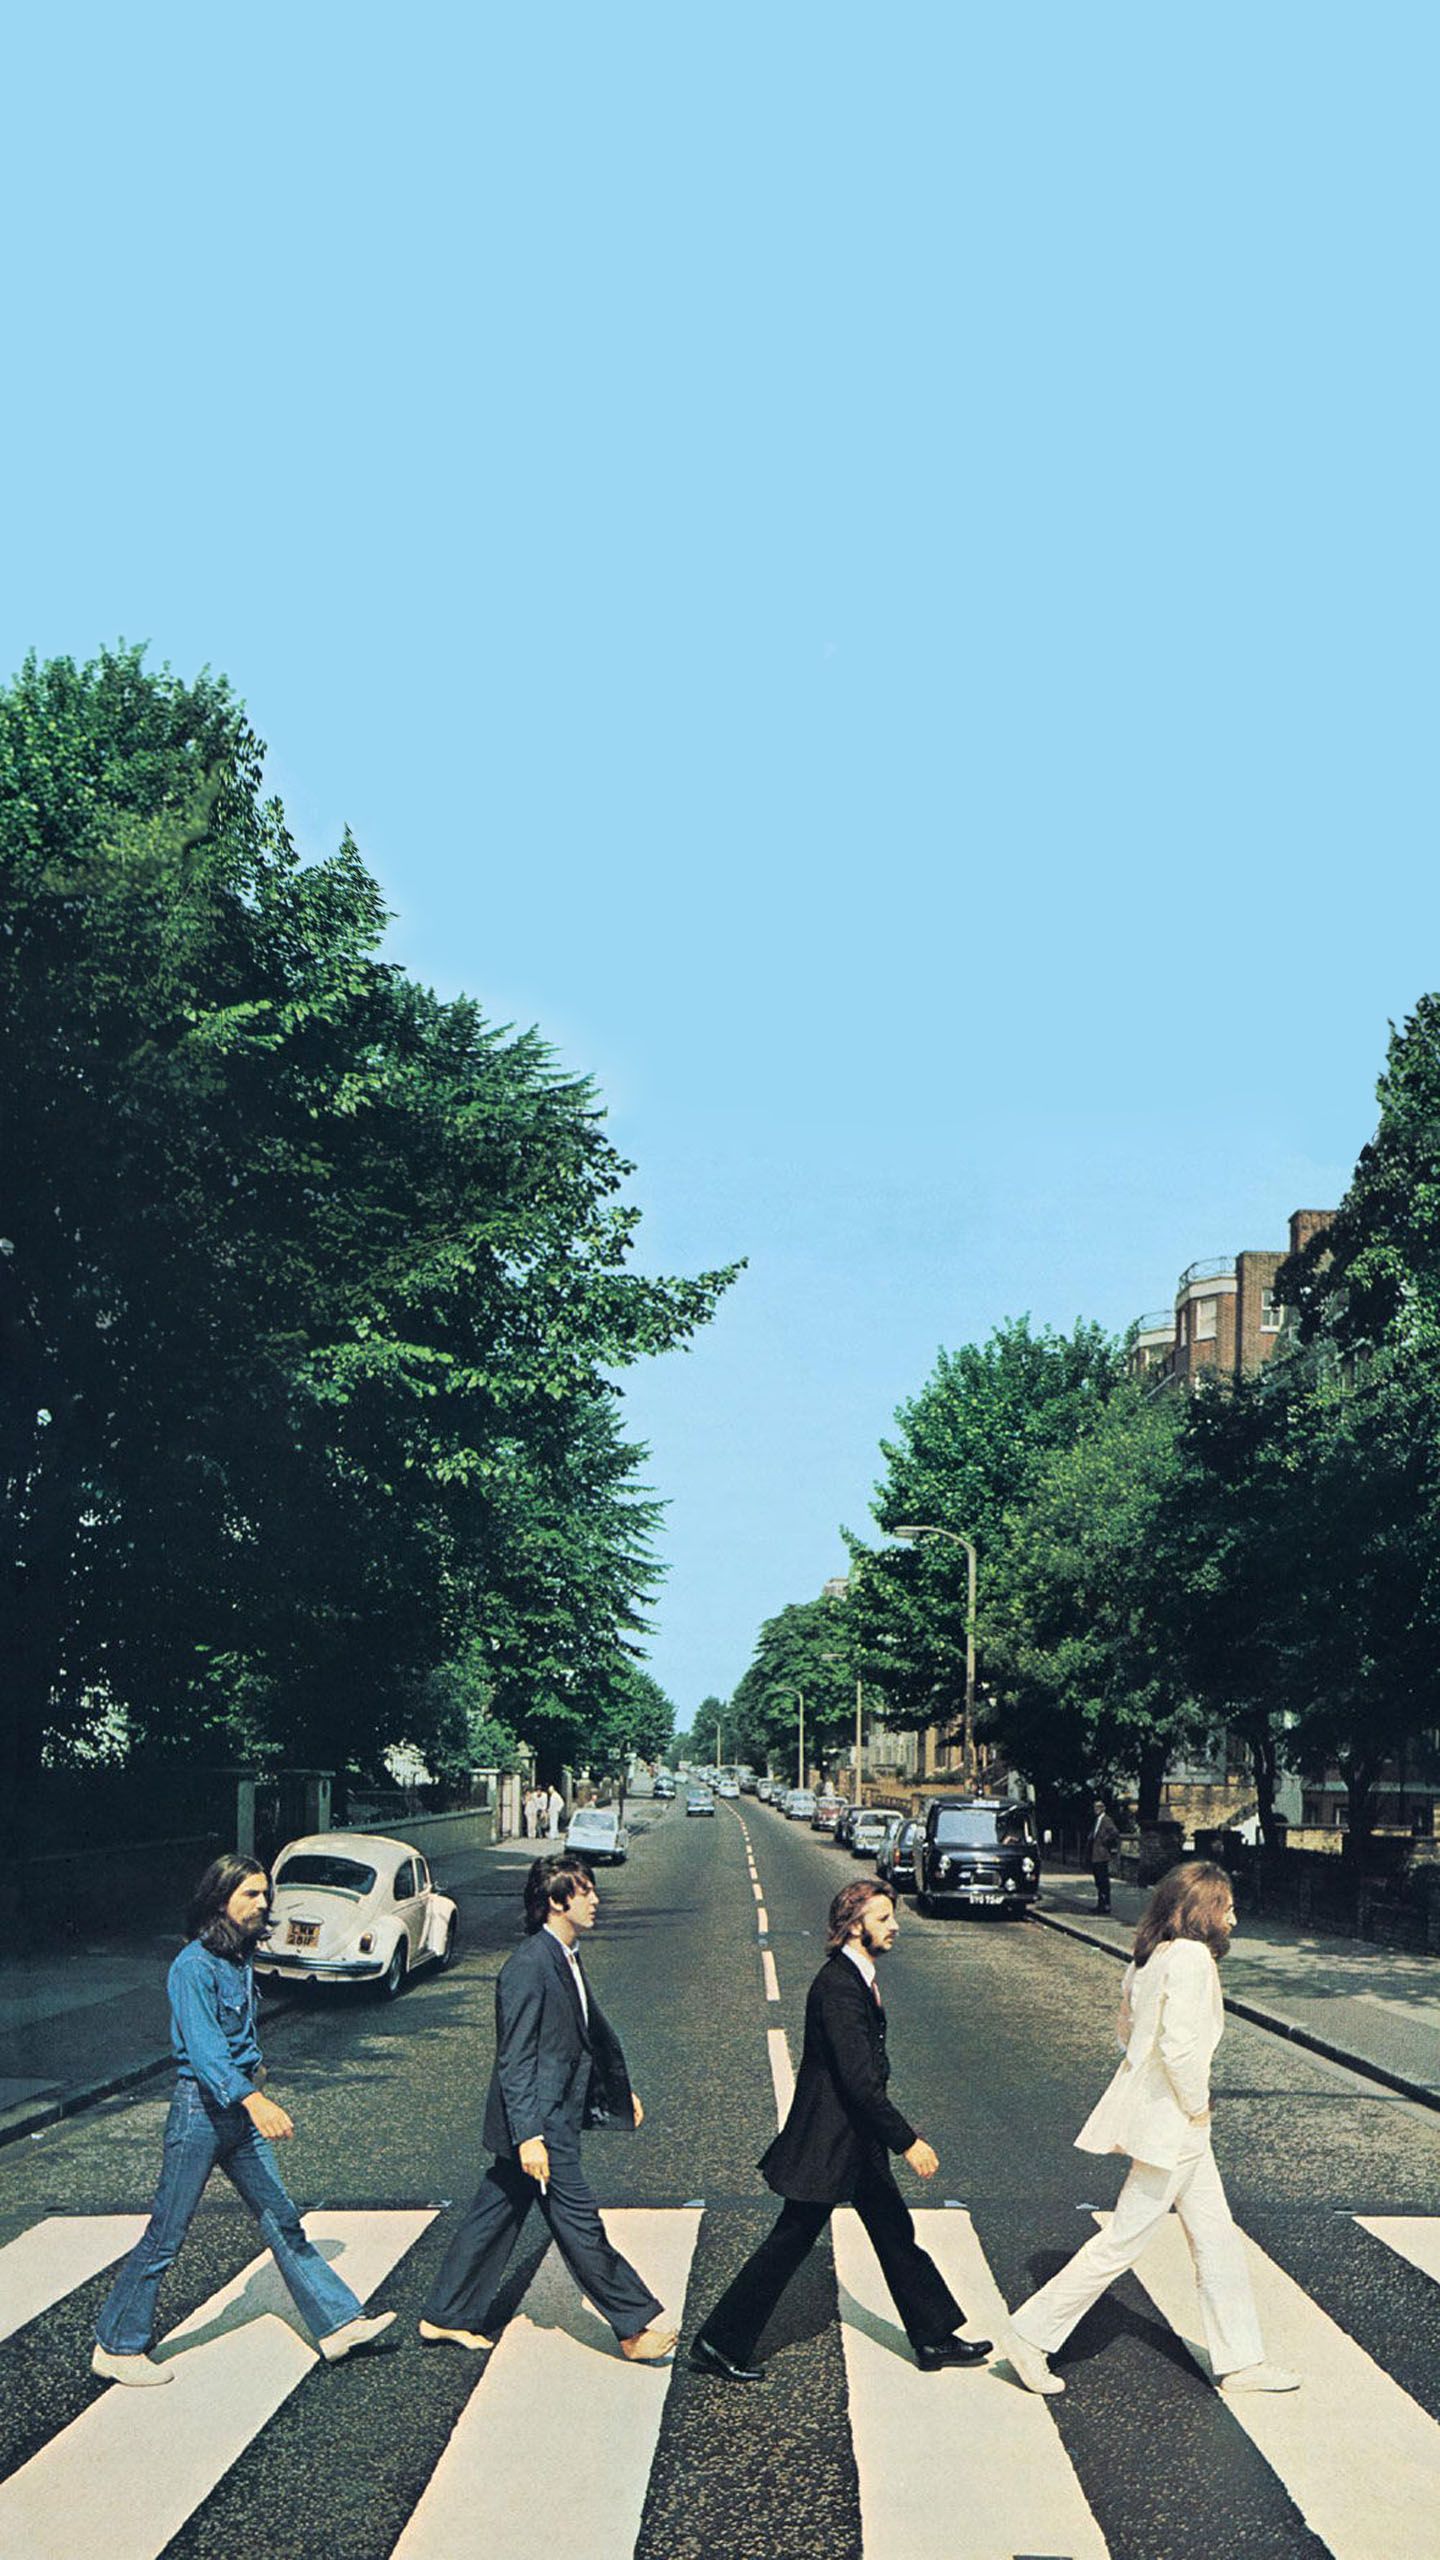 Abbey Road 1969 iPhone wallpaper  The Beatles in 3D  Facebook